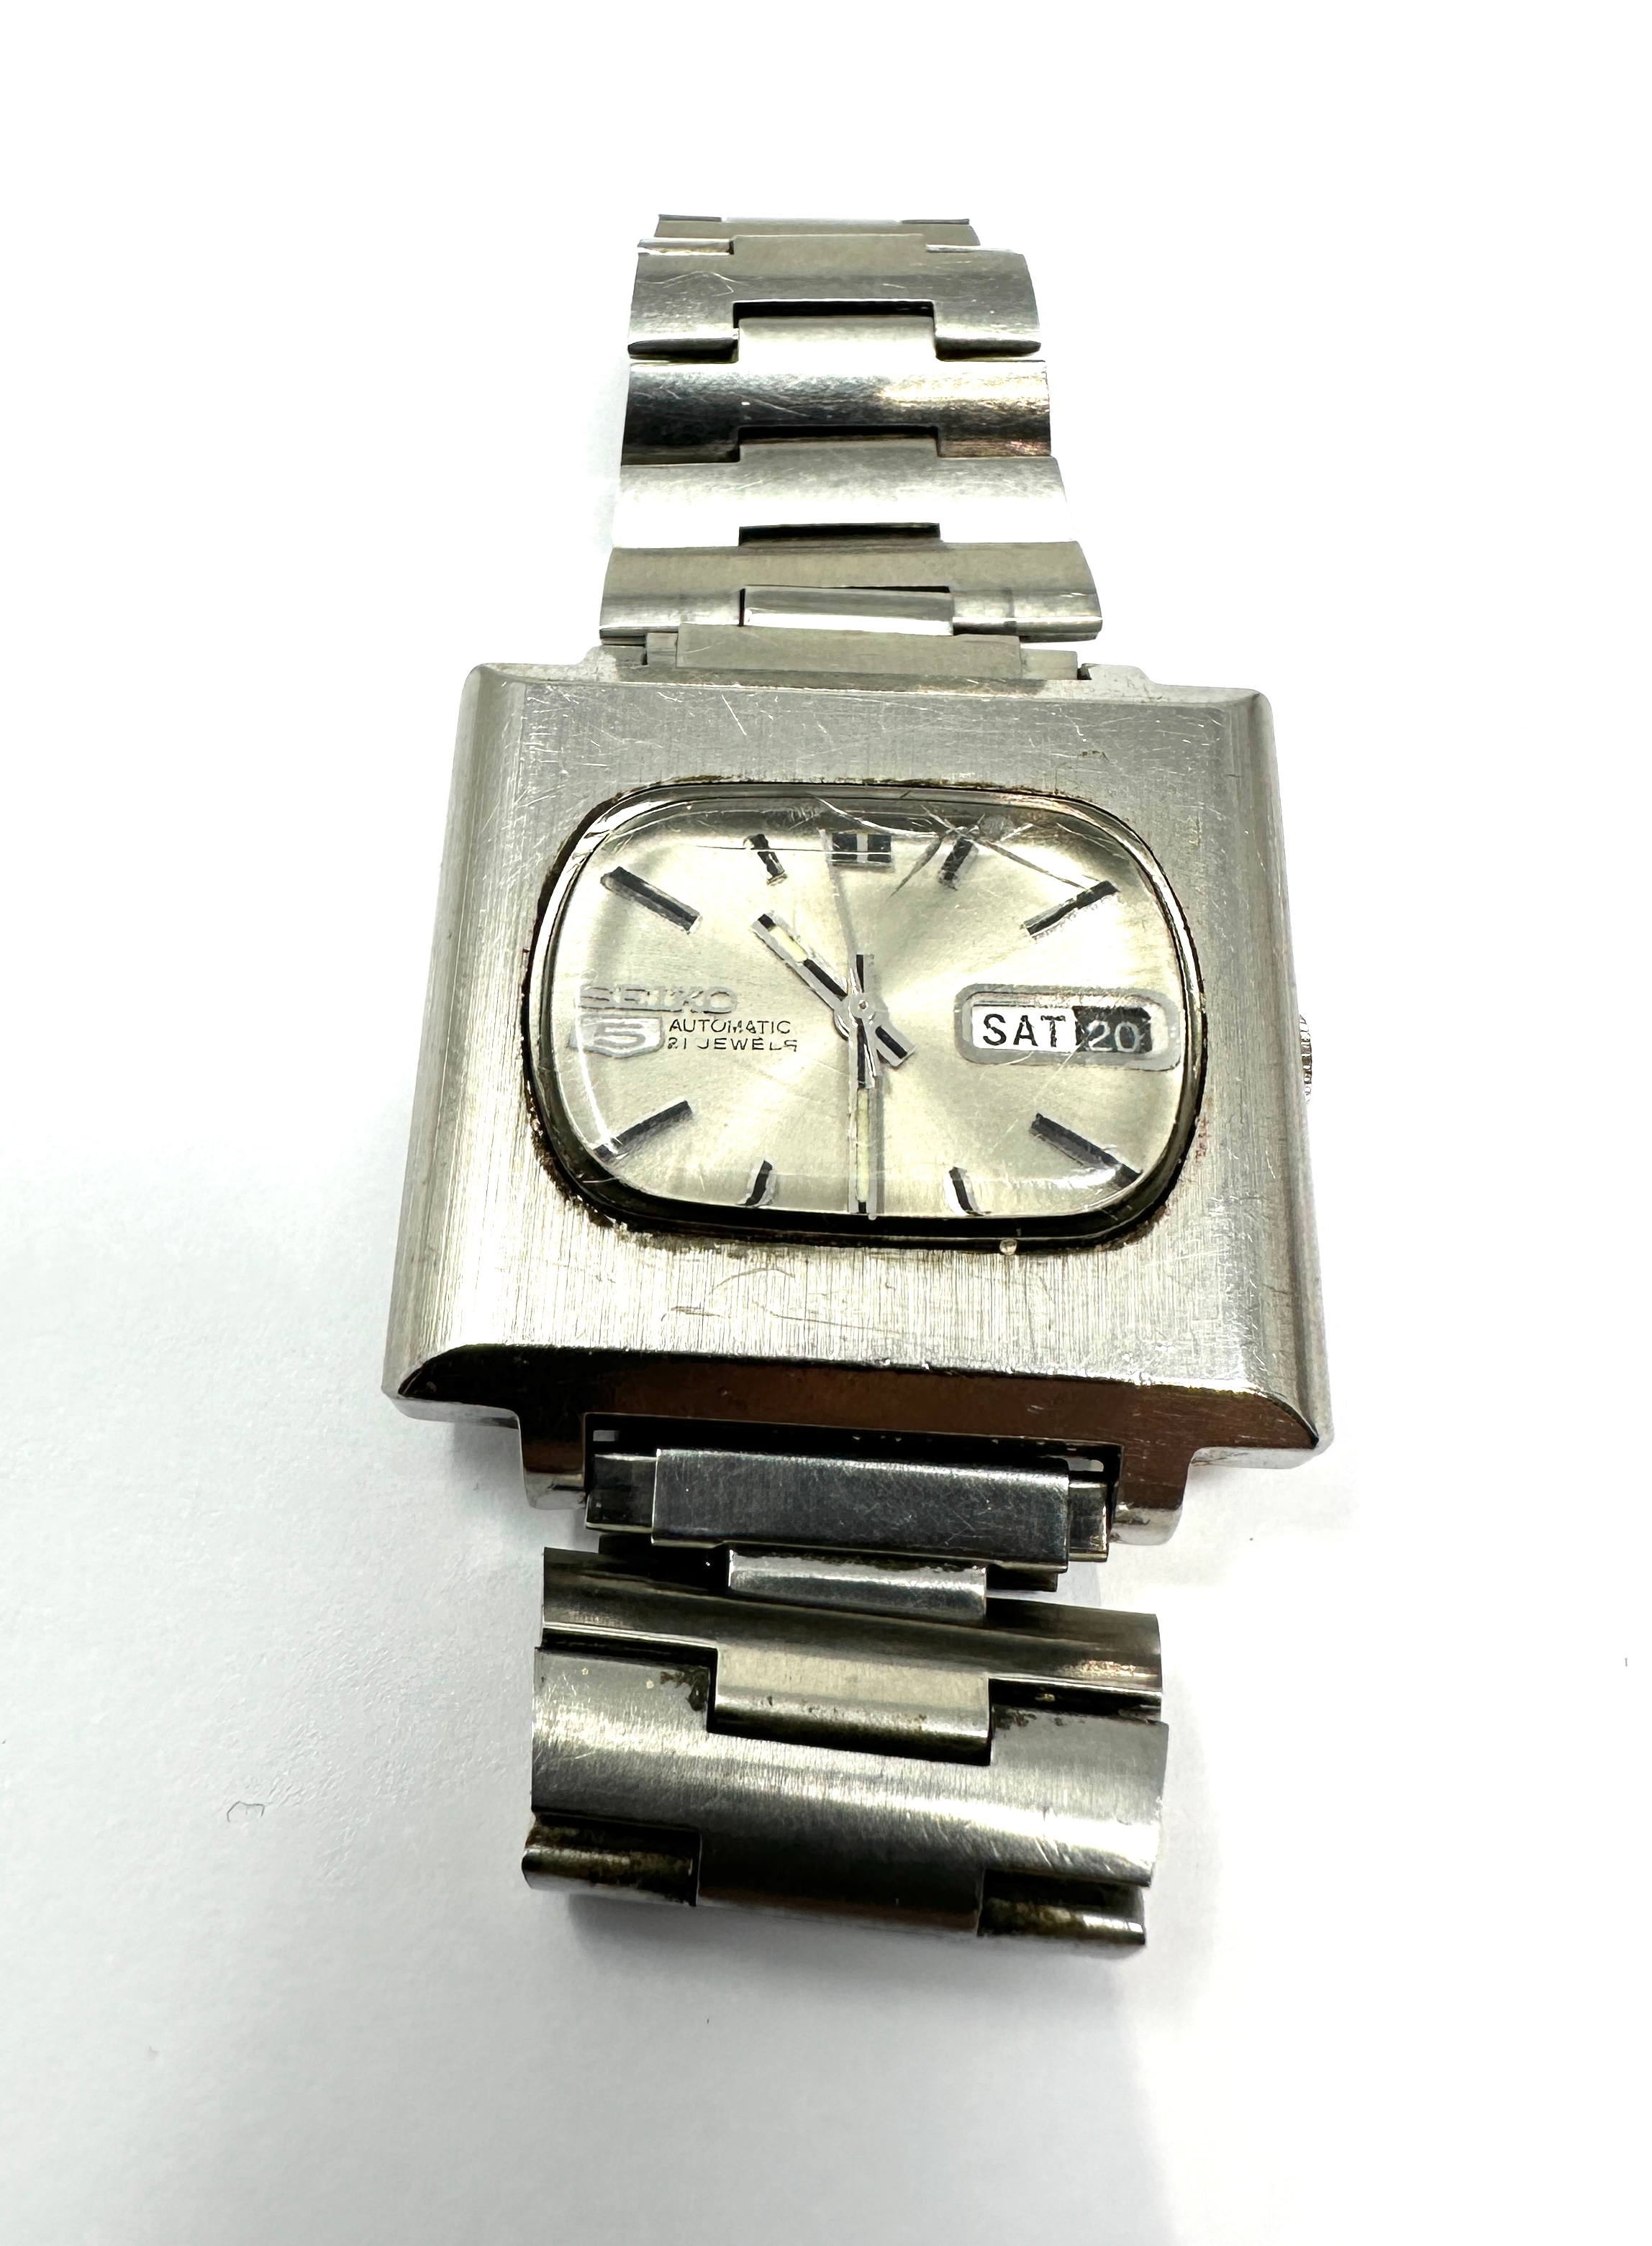 Vintage Seiko 5 TV Automatic 6119-5400- 21J Day/Date Wristwatch the watch is ticking crack to class